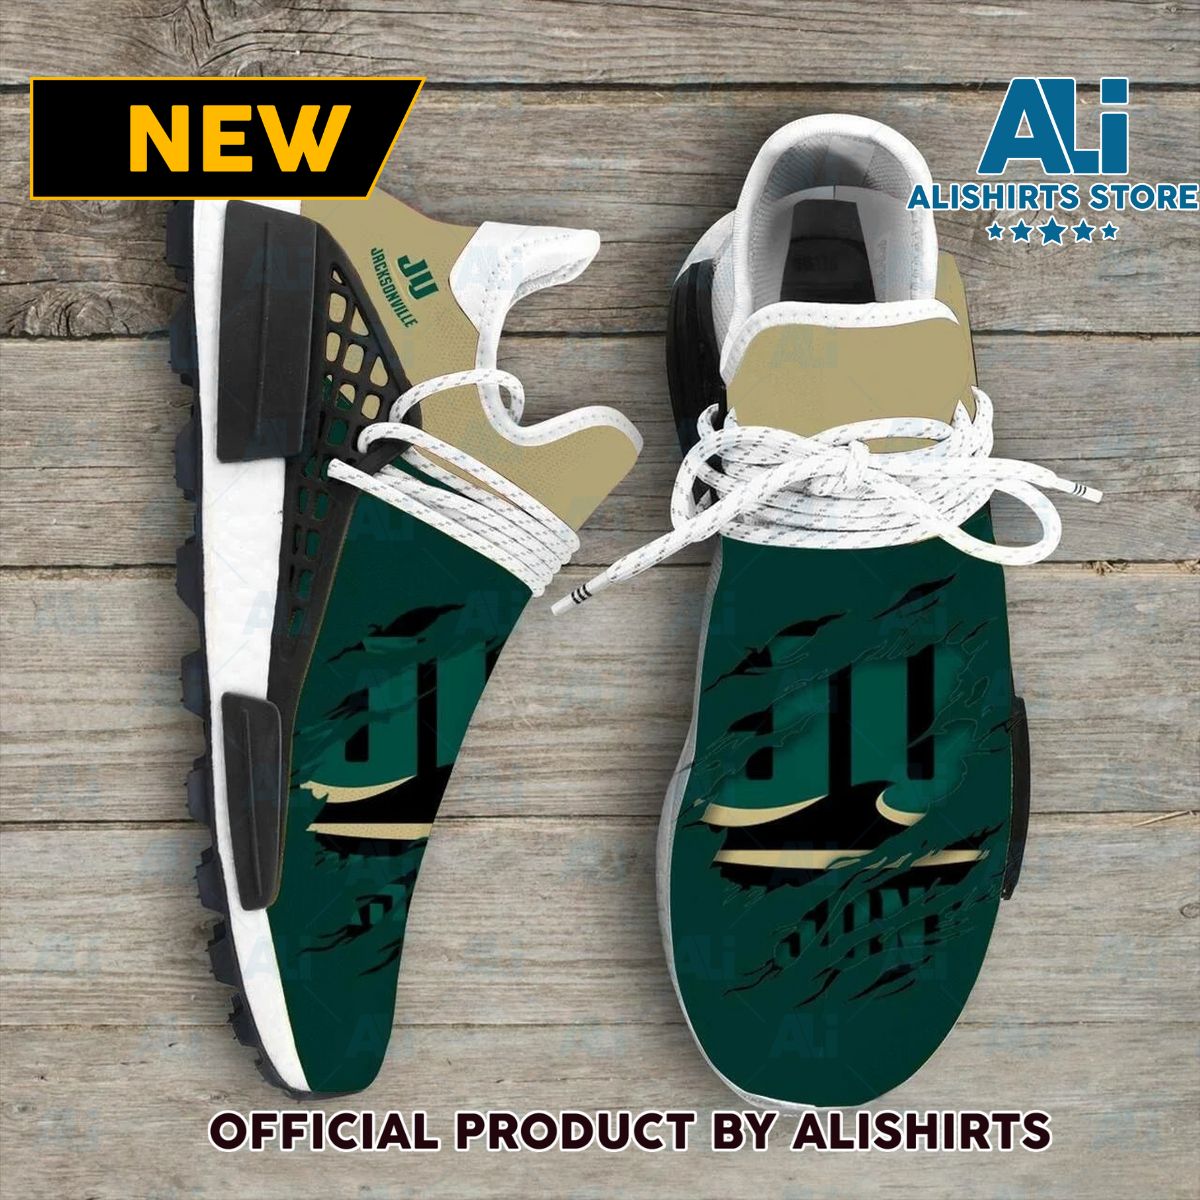 Jacksonville Dolphins Ncaa NMD Human Race shoes  Adidas NMD Sneakers